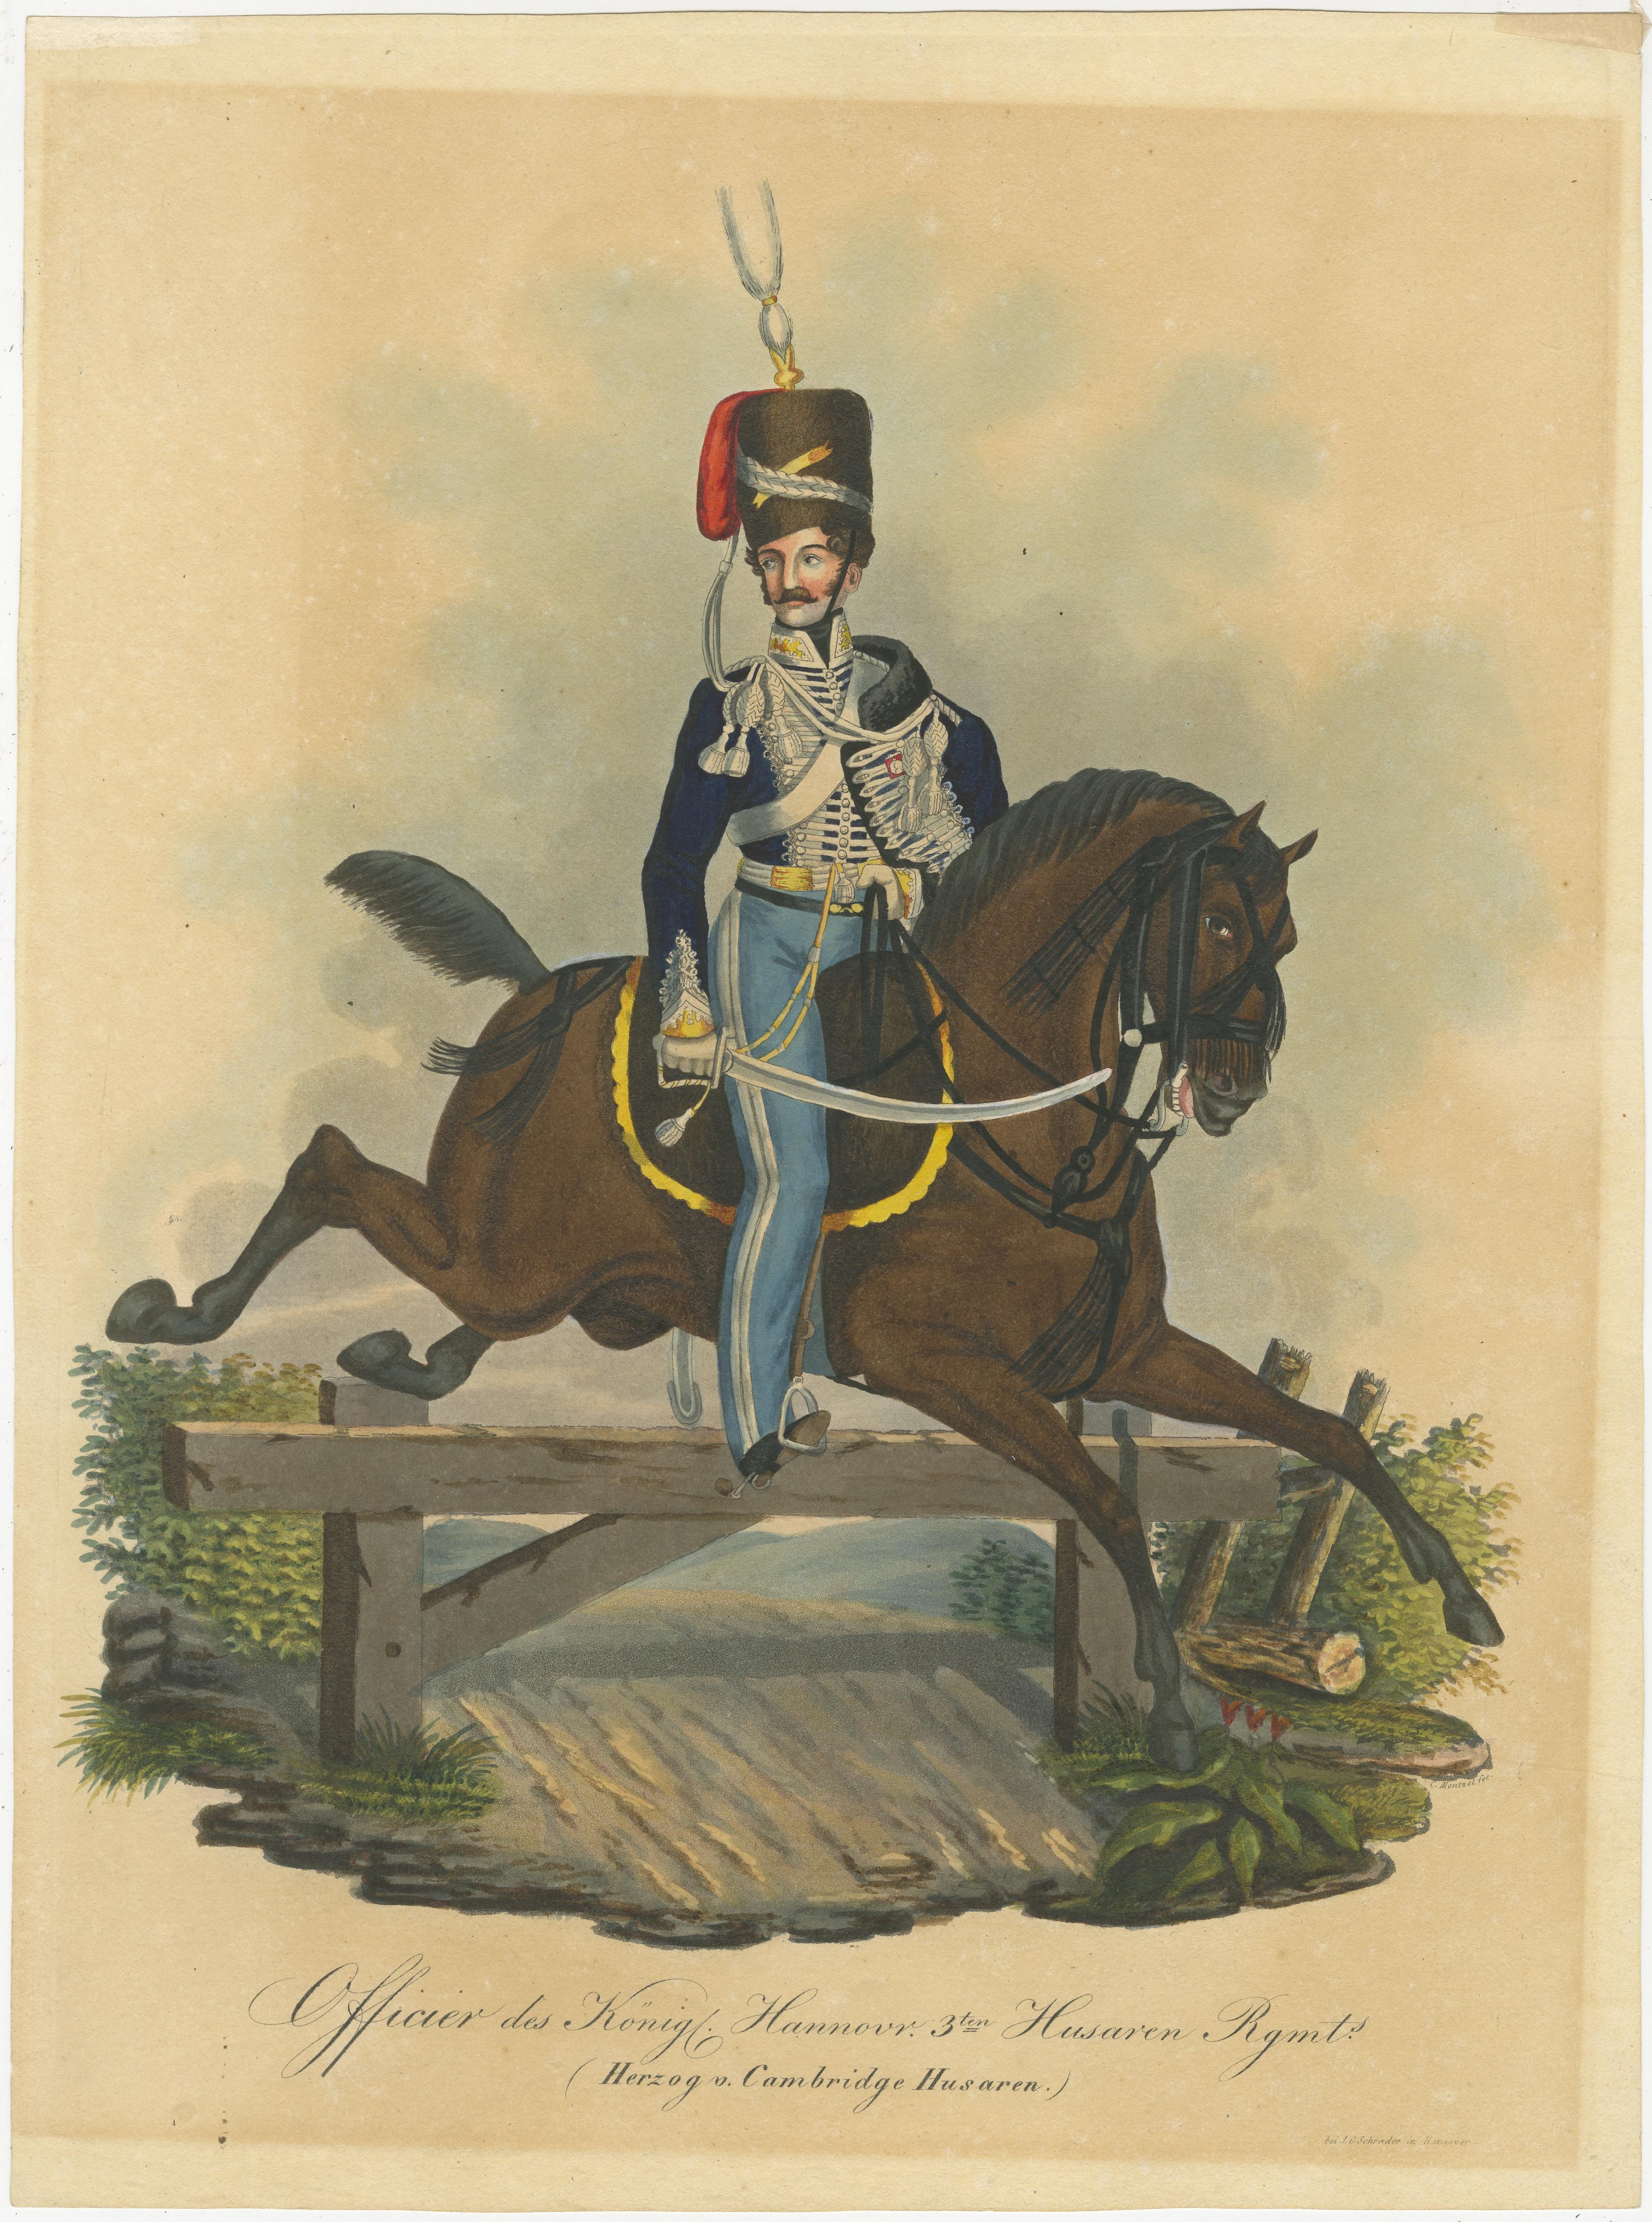 This is an hand-colored illustration of an officer from the King's German Legion, specifically the 3rd Hussar Regiment, also known as the Duke of Cambridge's Hussars. 

The King's German Legion was a British Army unit of mostly expatriate German